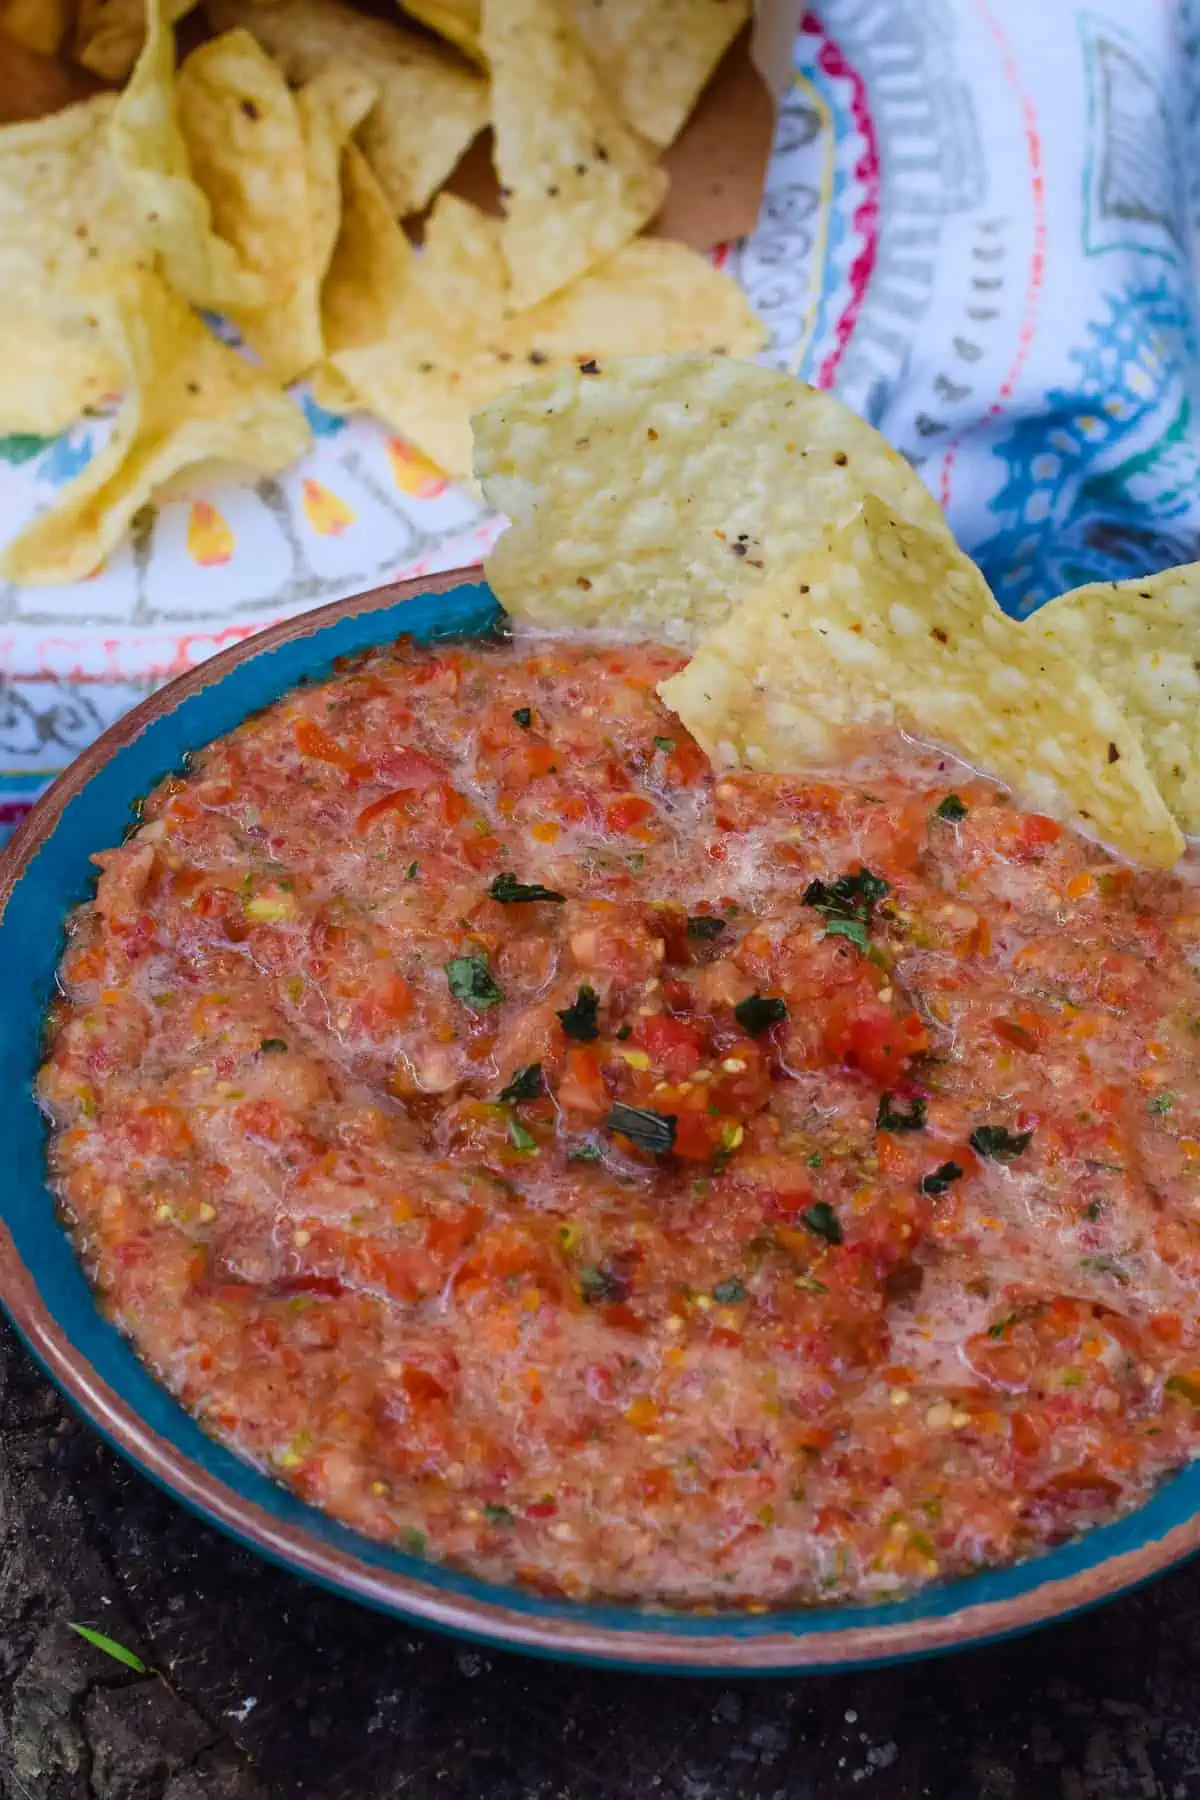 tomato basil salsa in blue bowl with tortilla chips dipped and in bag to side